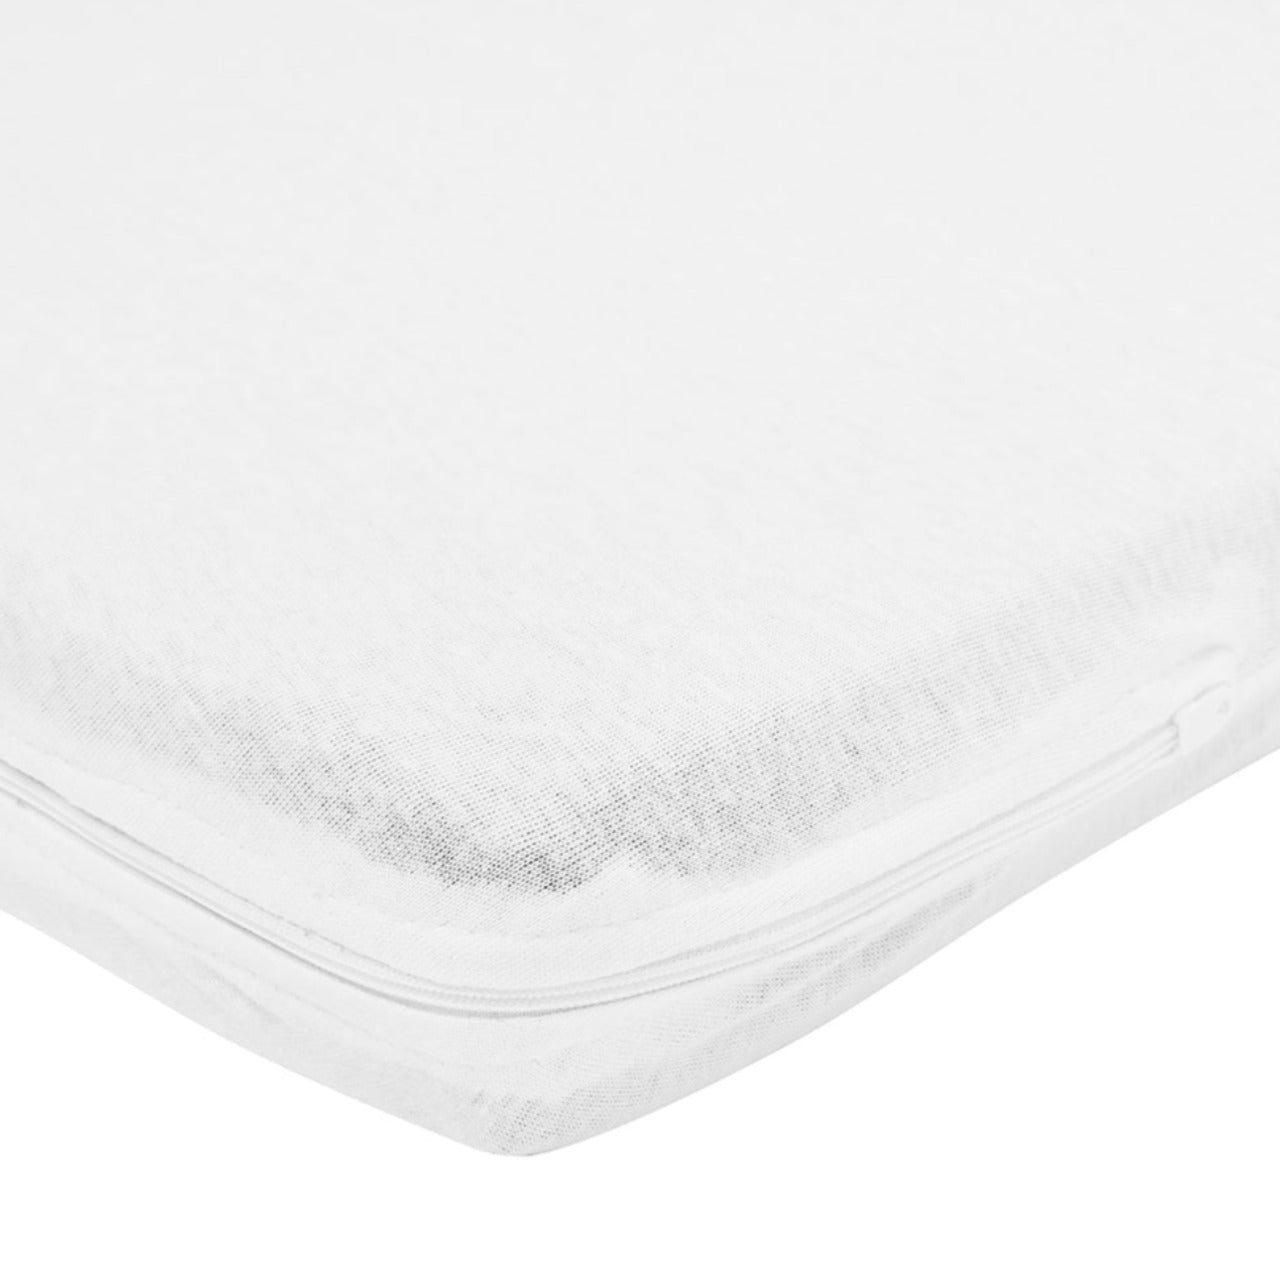 Camping bed mattress fitted sheet 60x120